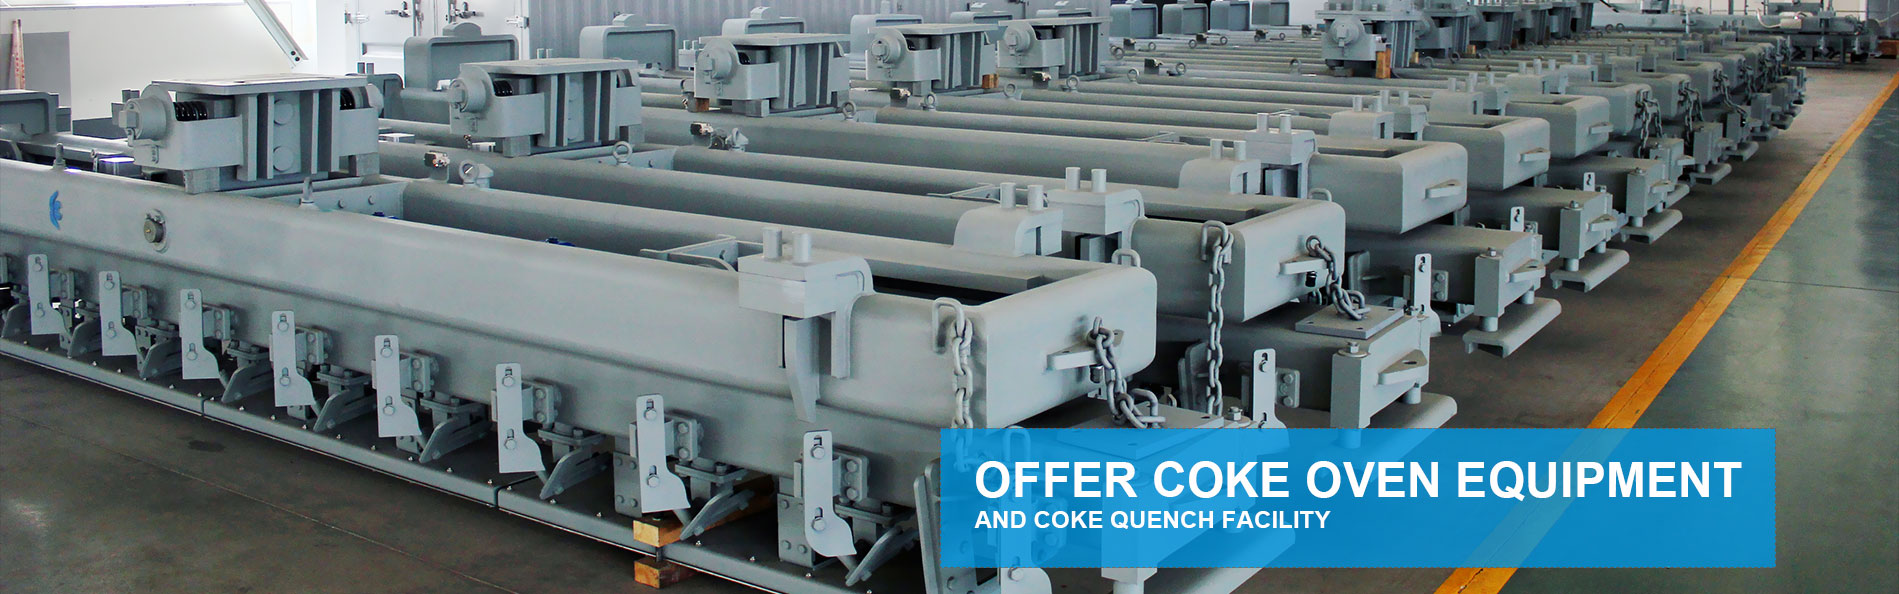 Offer superior coke oven equipment and coke quench facility